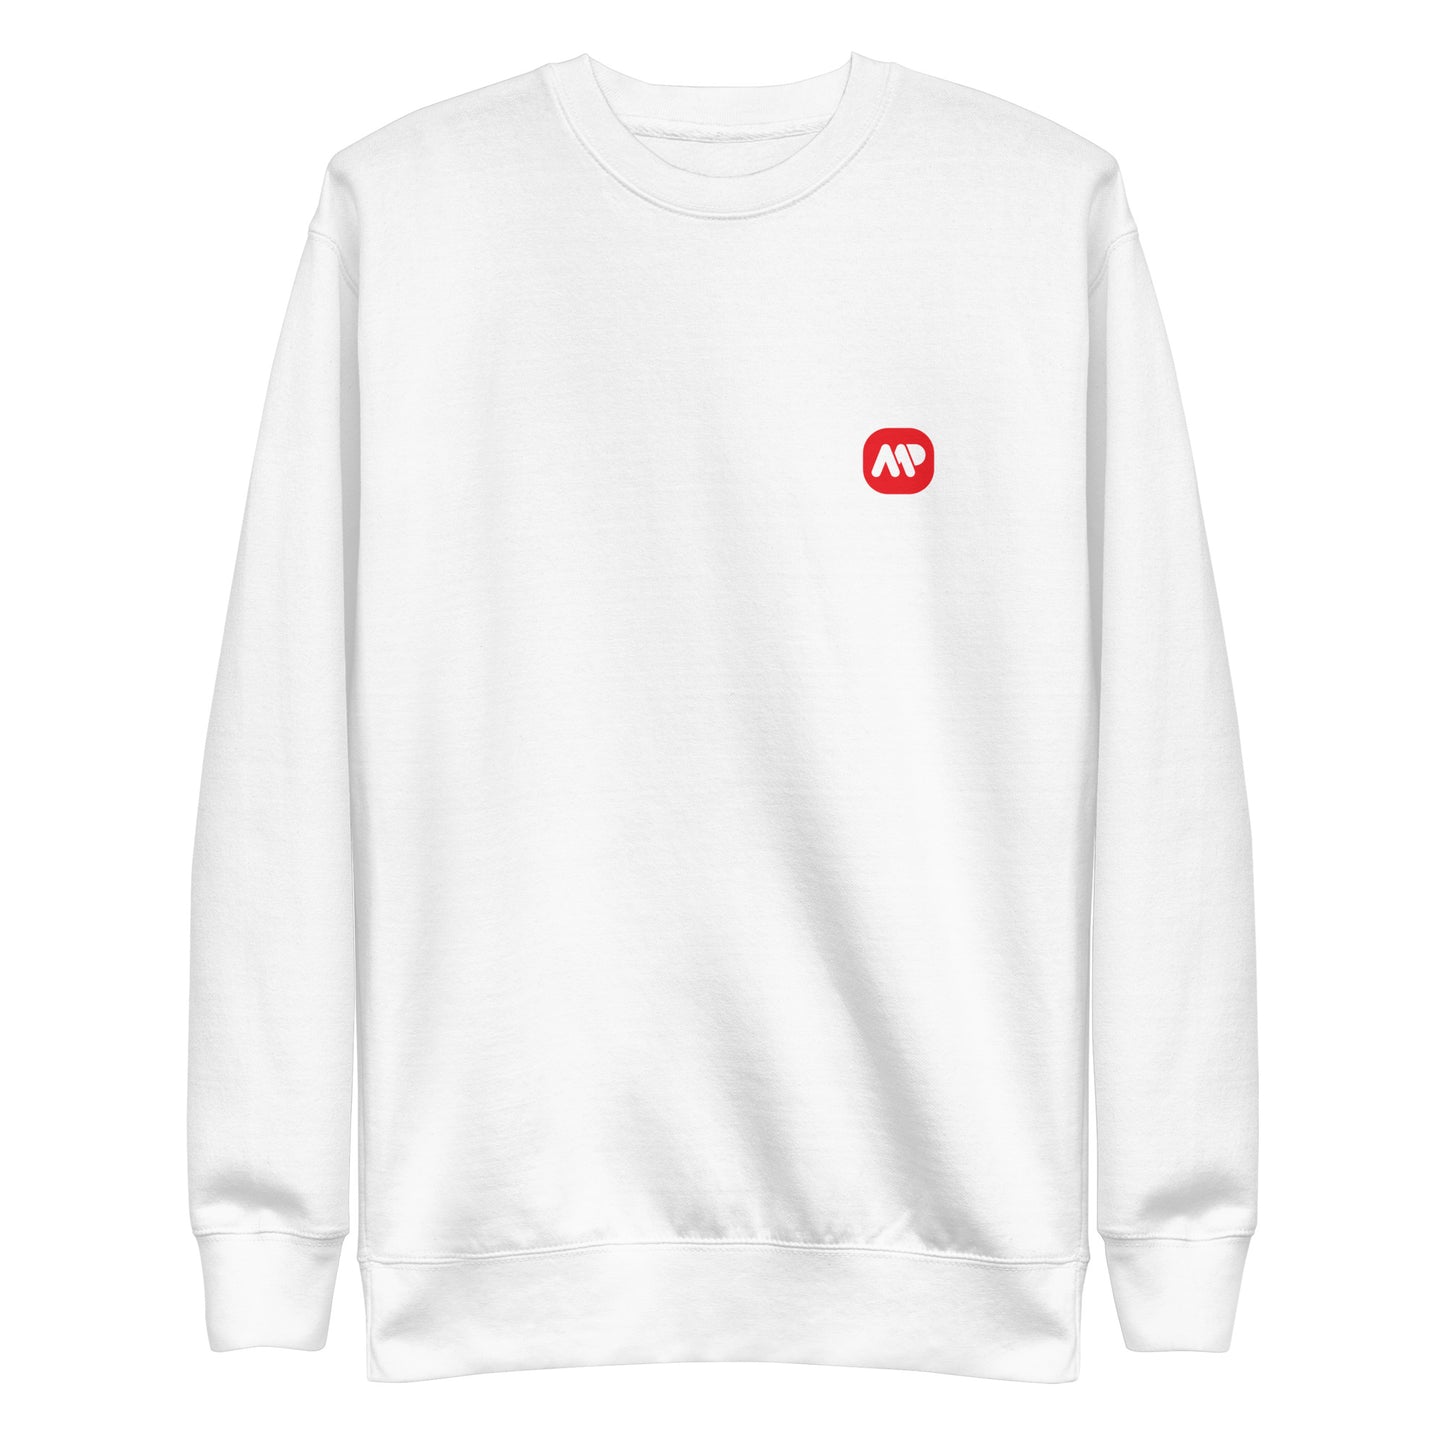 Roll With Care Sweatshirt